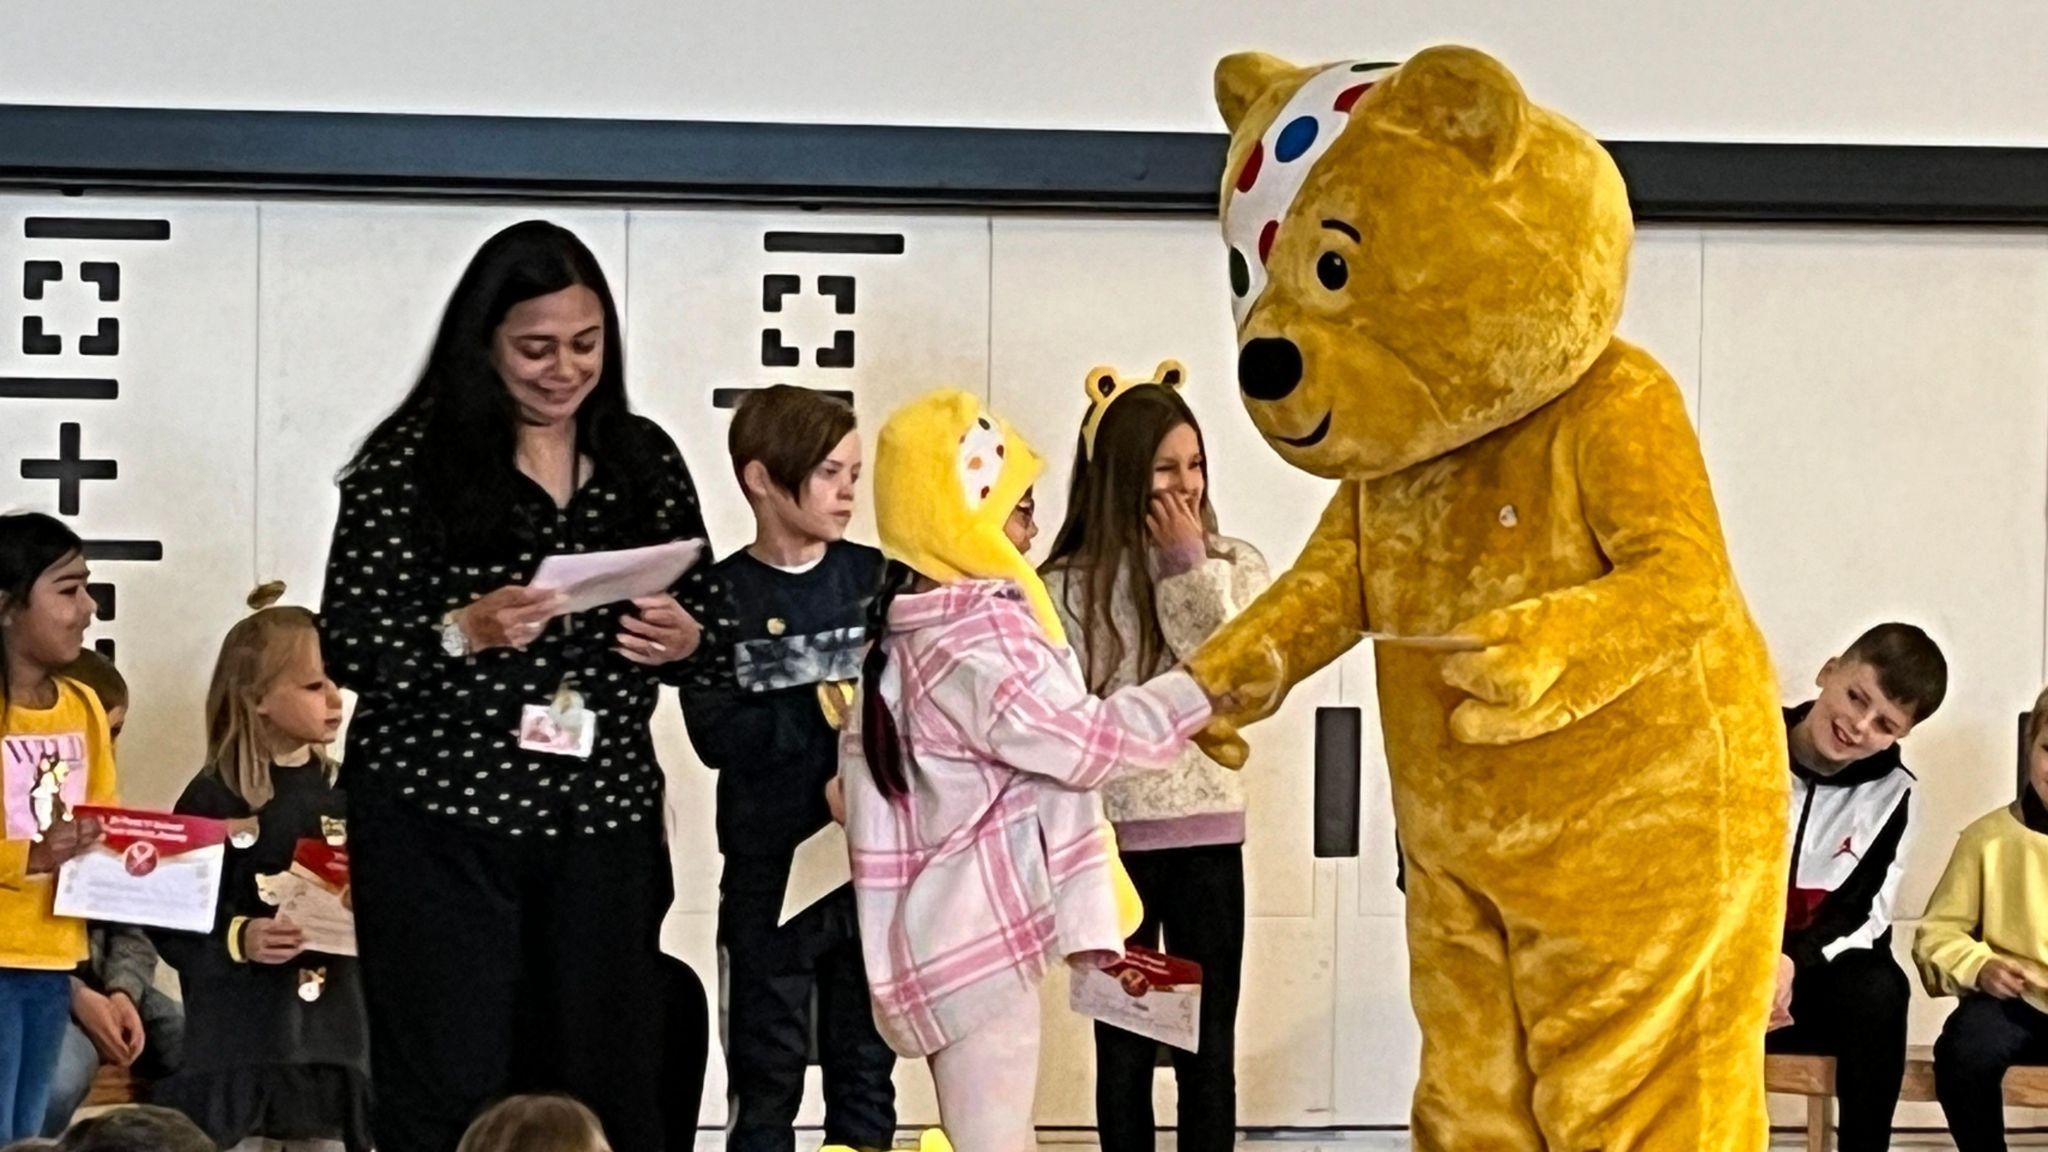 Pudsey the bear at St Peter primary school in Jersey